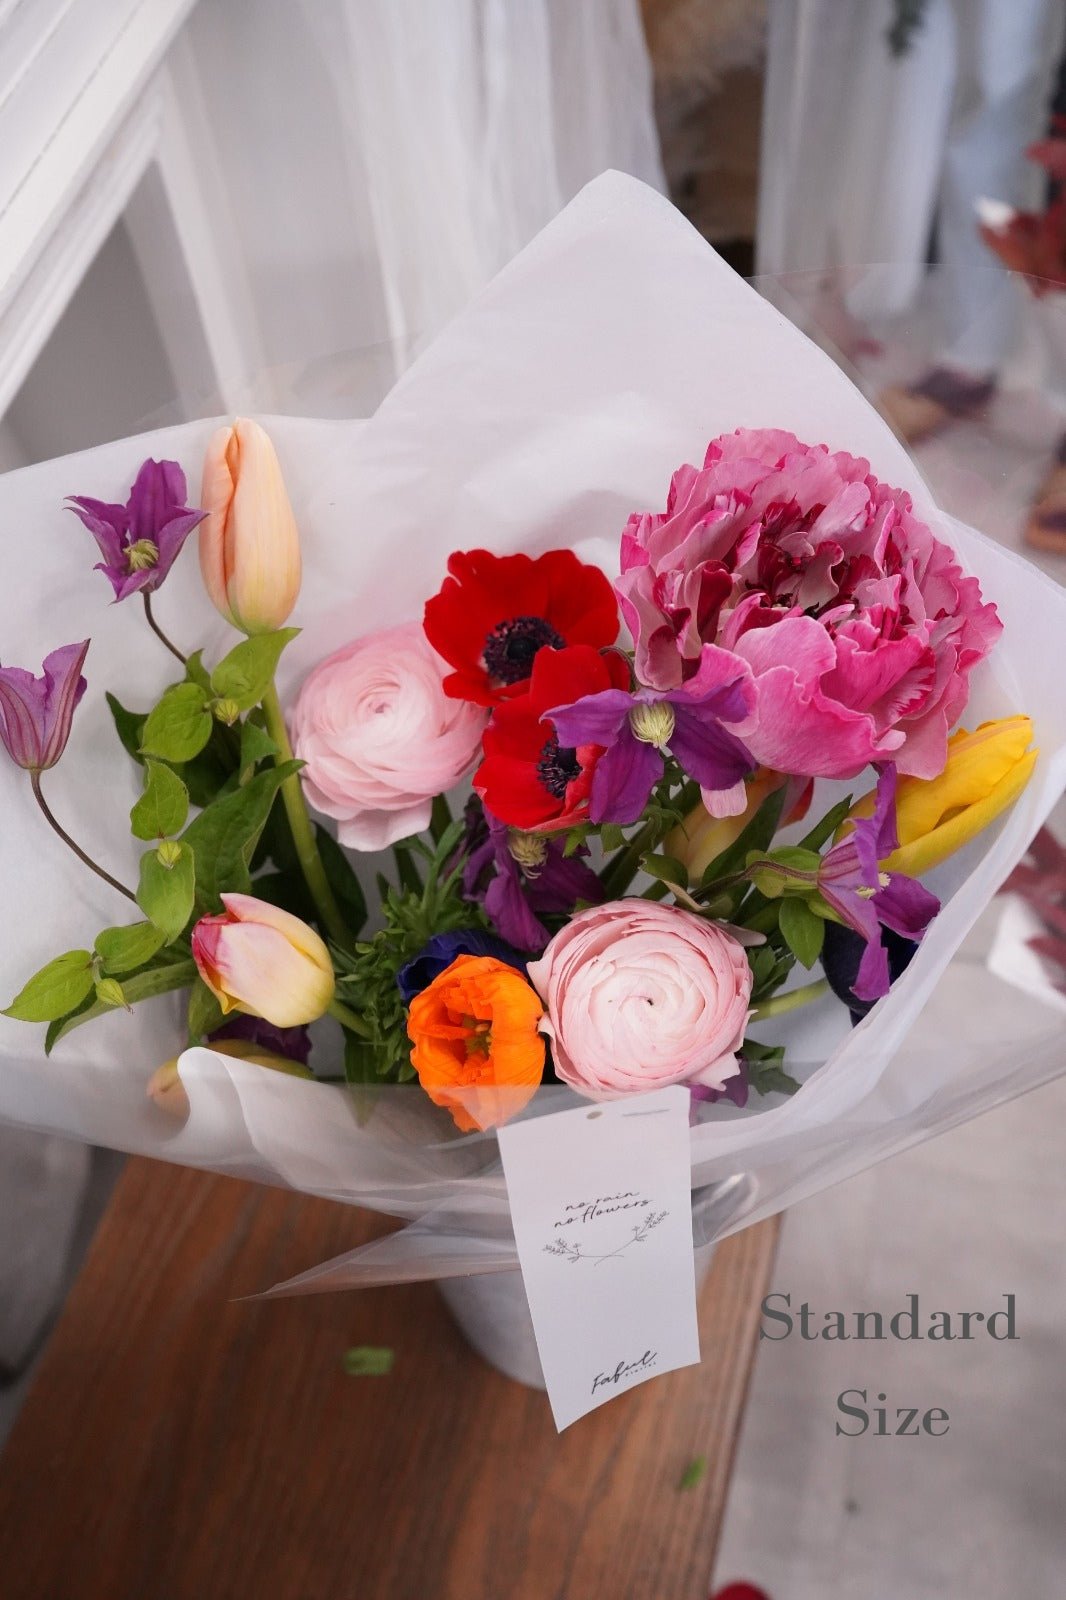 Weekly Flower Subscription - Standard - - Subscription - - 6